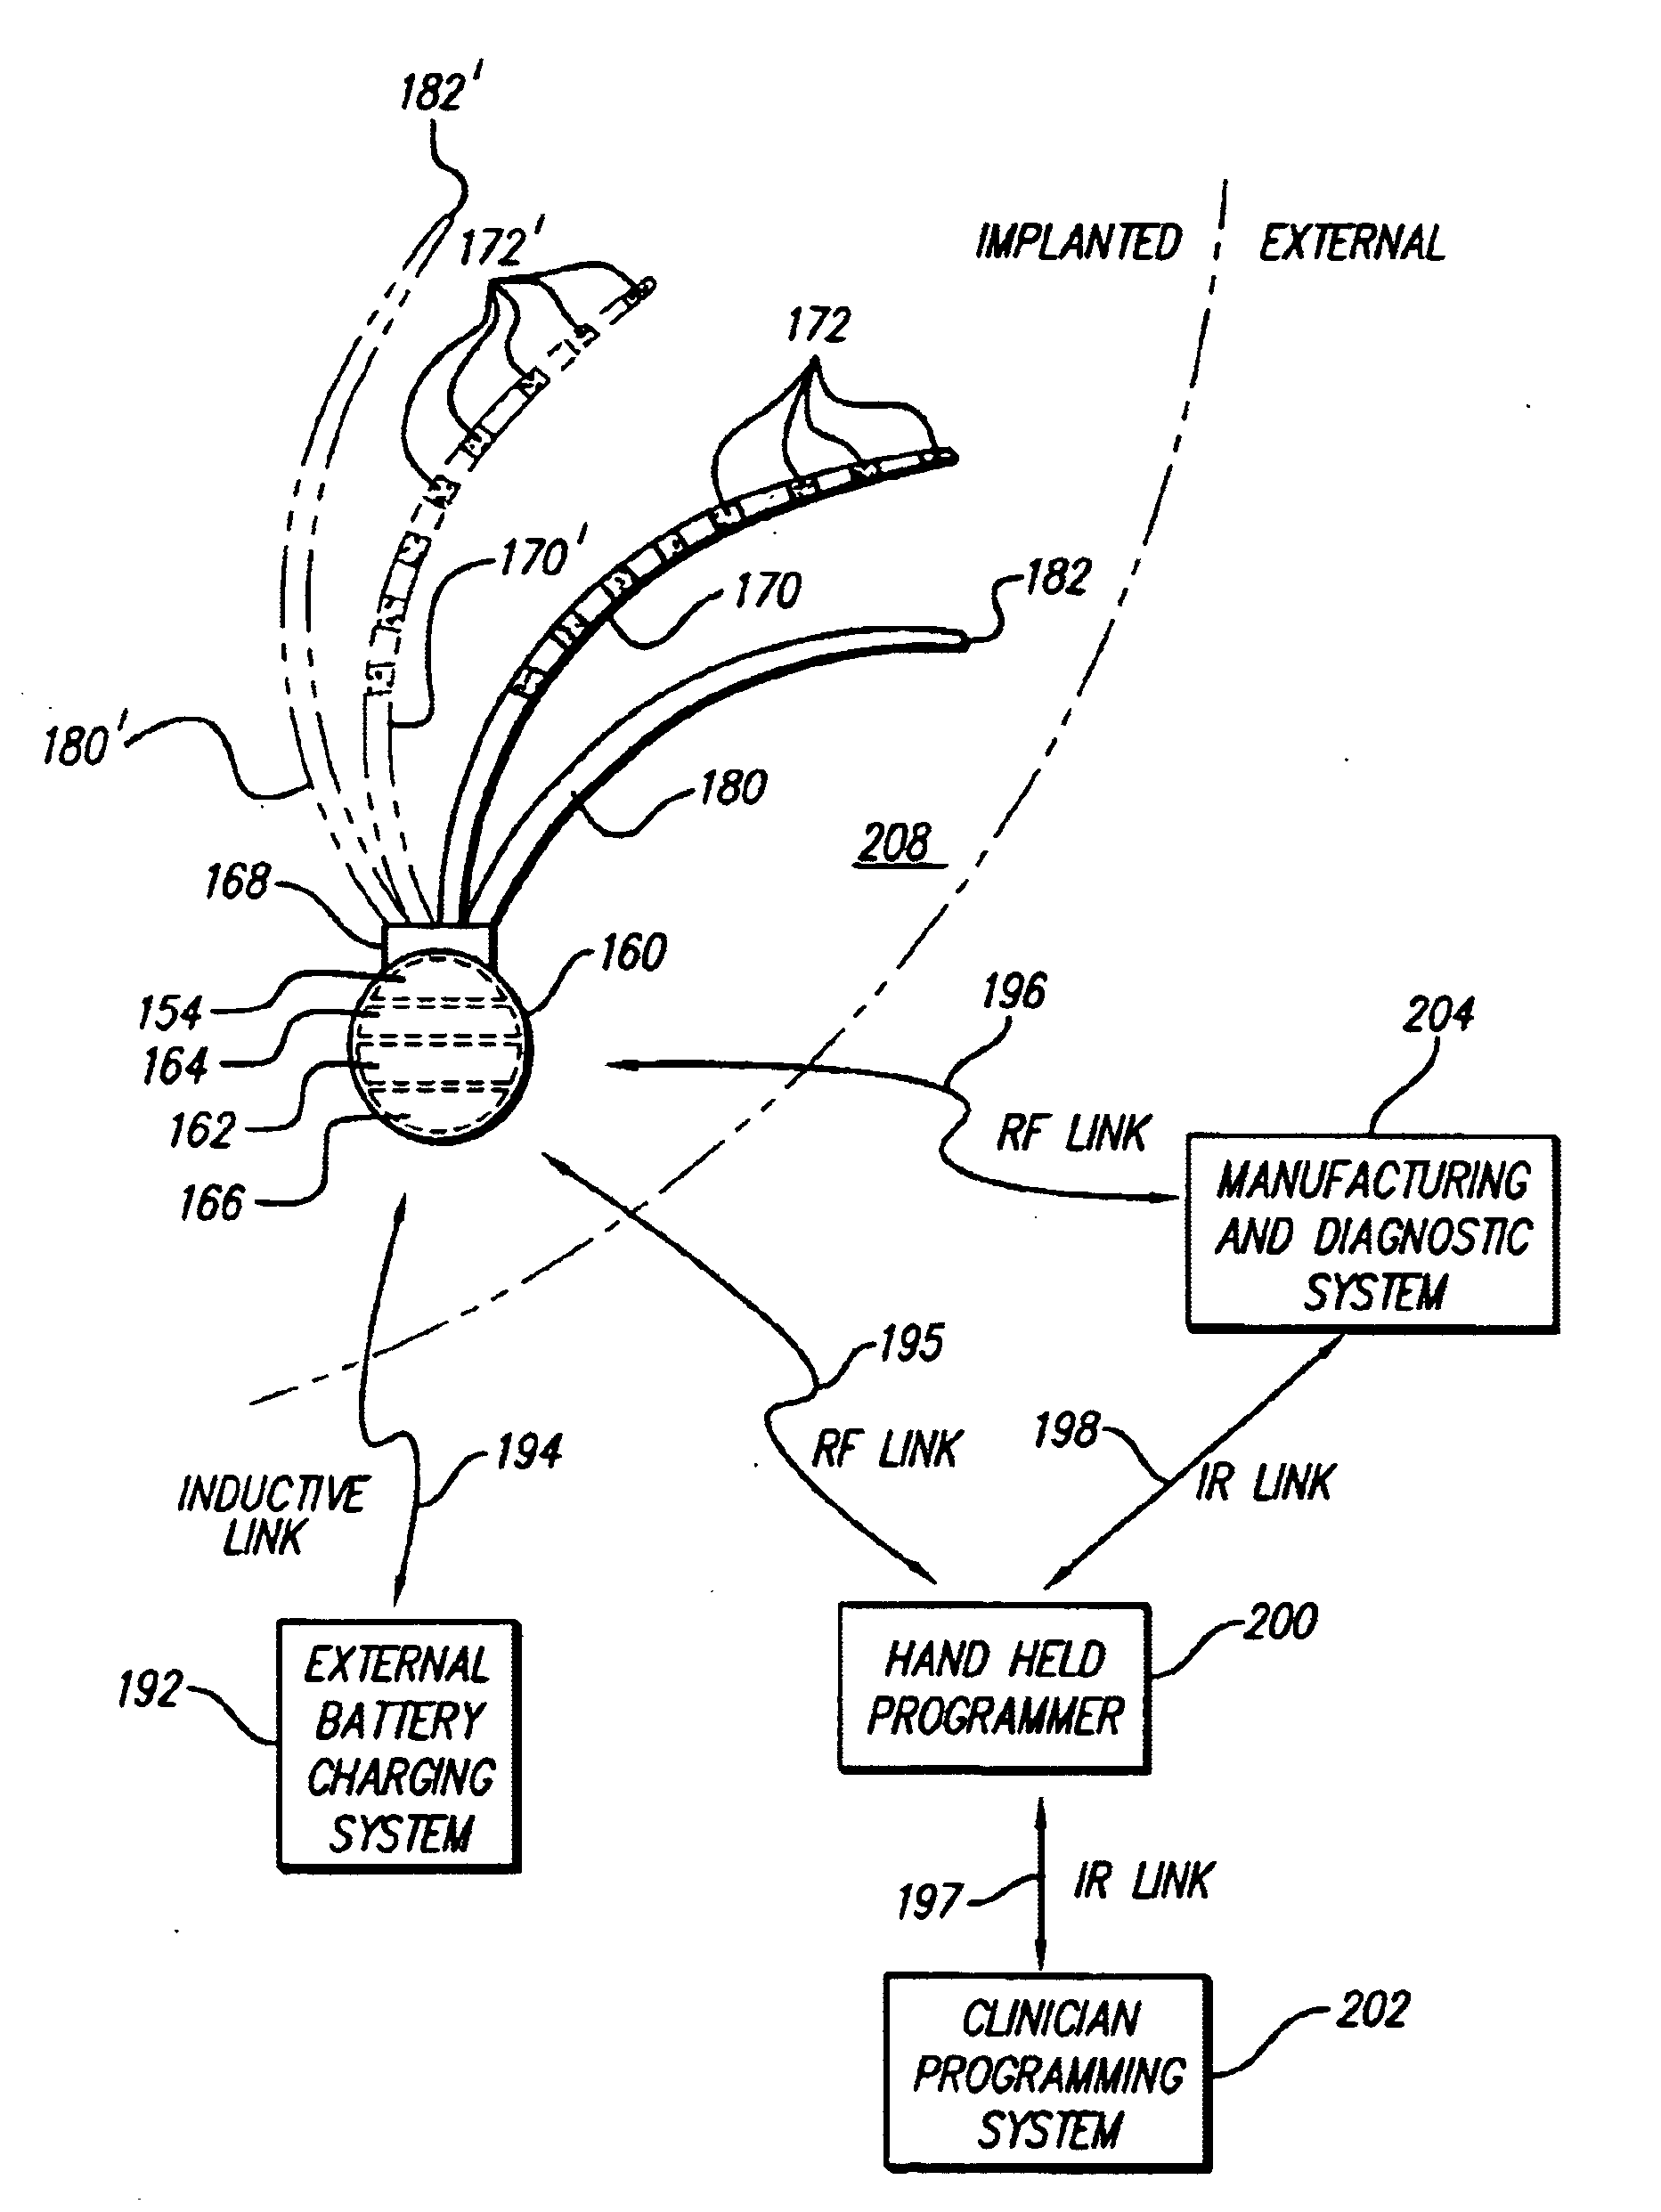 Systems and methods for modulation of circulatory perfusion by electrical and/or drug stimulation